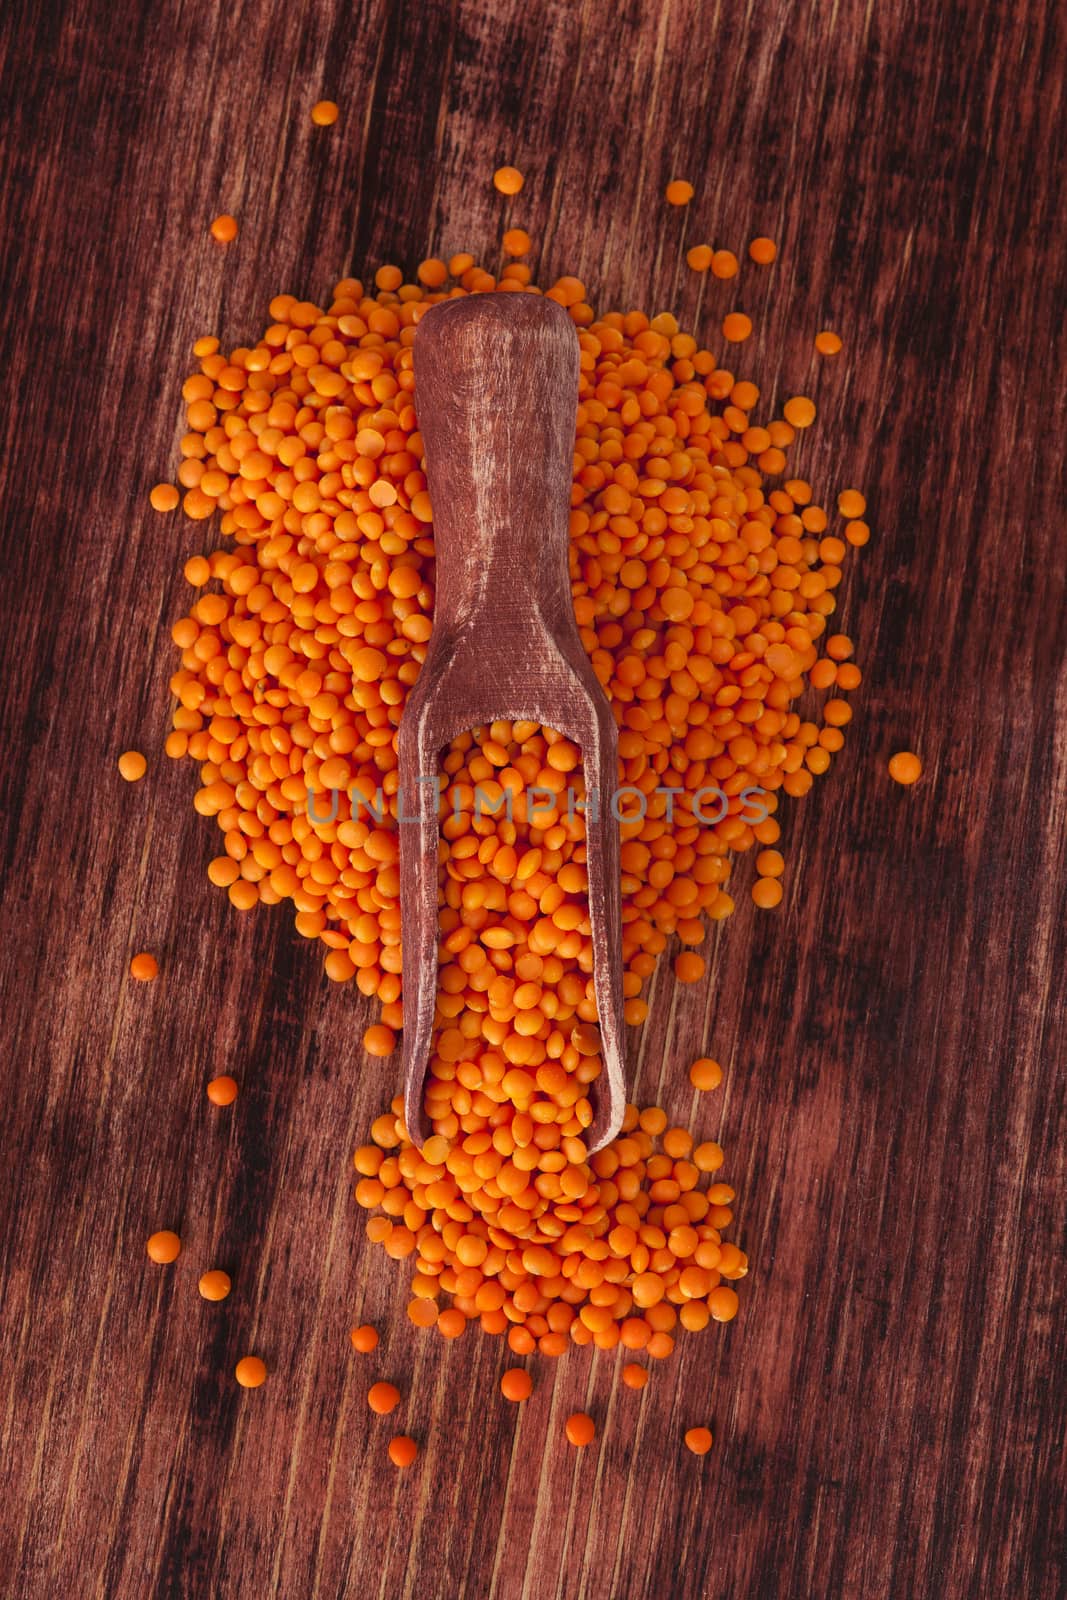 Red lentils. by eskymaks